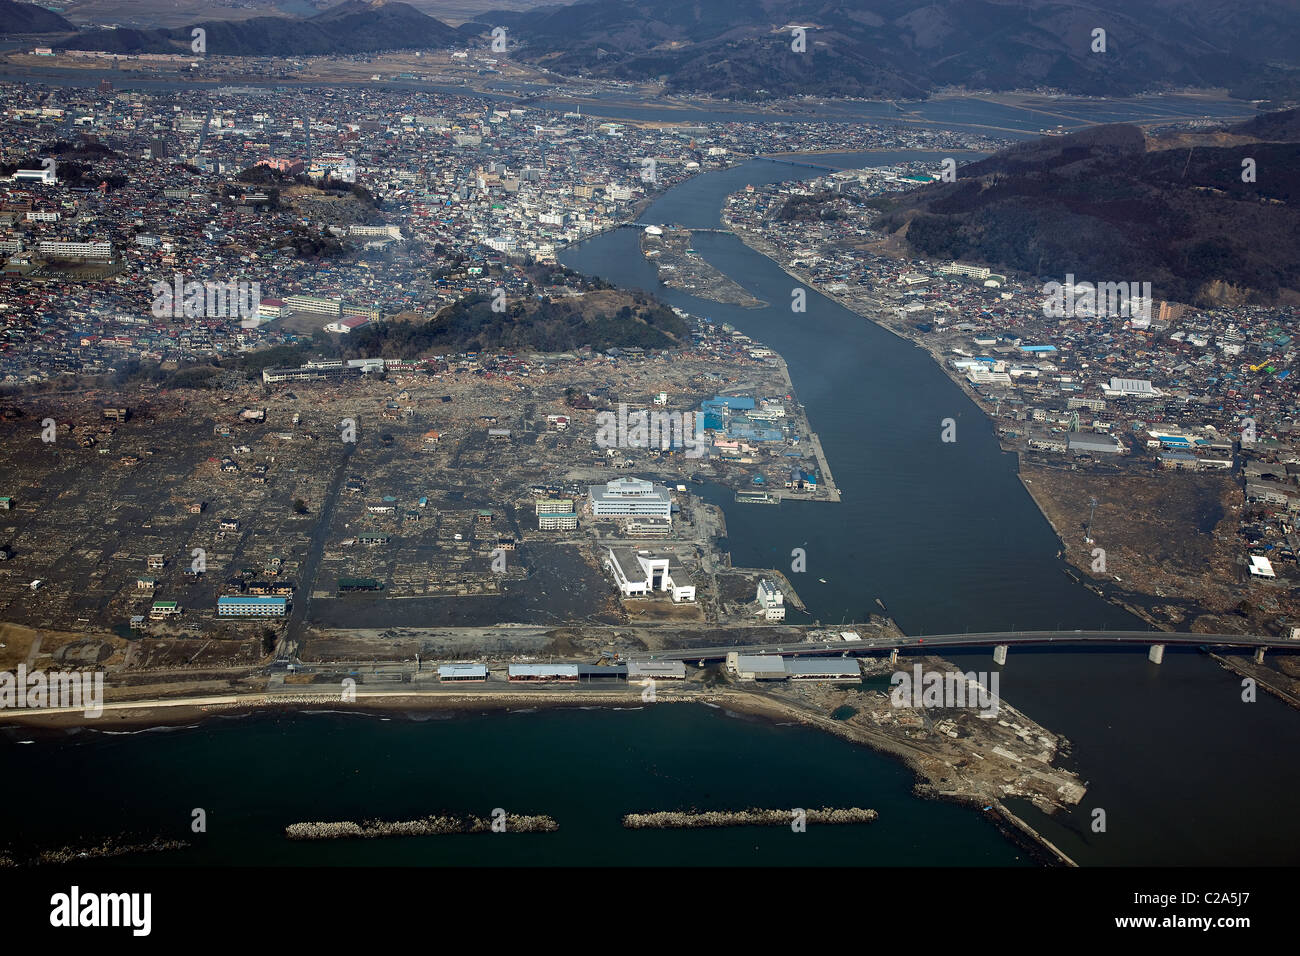 Aerial view of damage to Ishinomaki, Miyagi Prefecture after a 9. 0 magnitude earthquake and subsequent tsunami devastated the Stock Photo